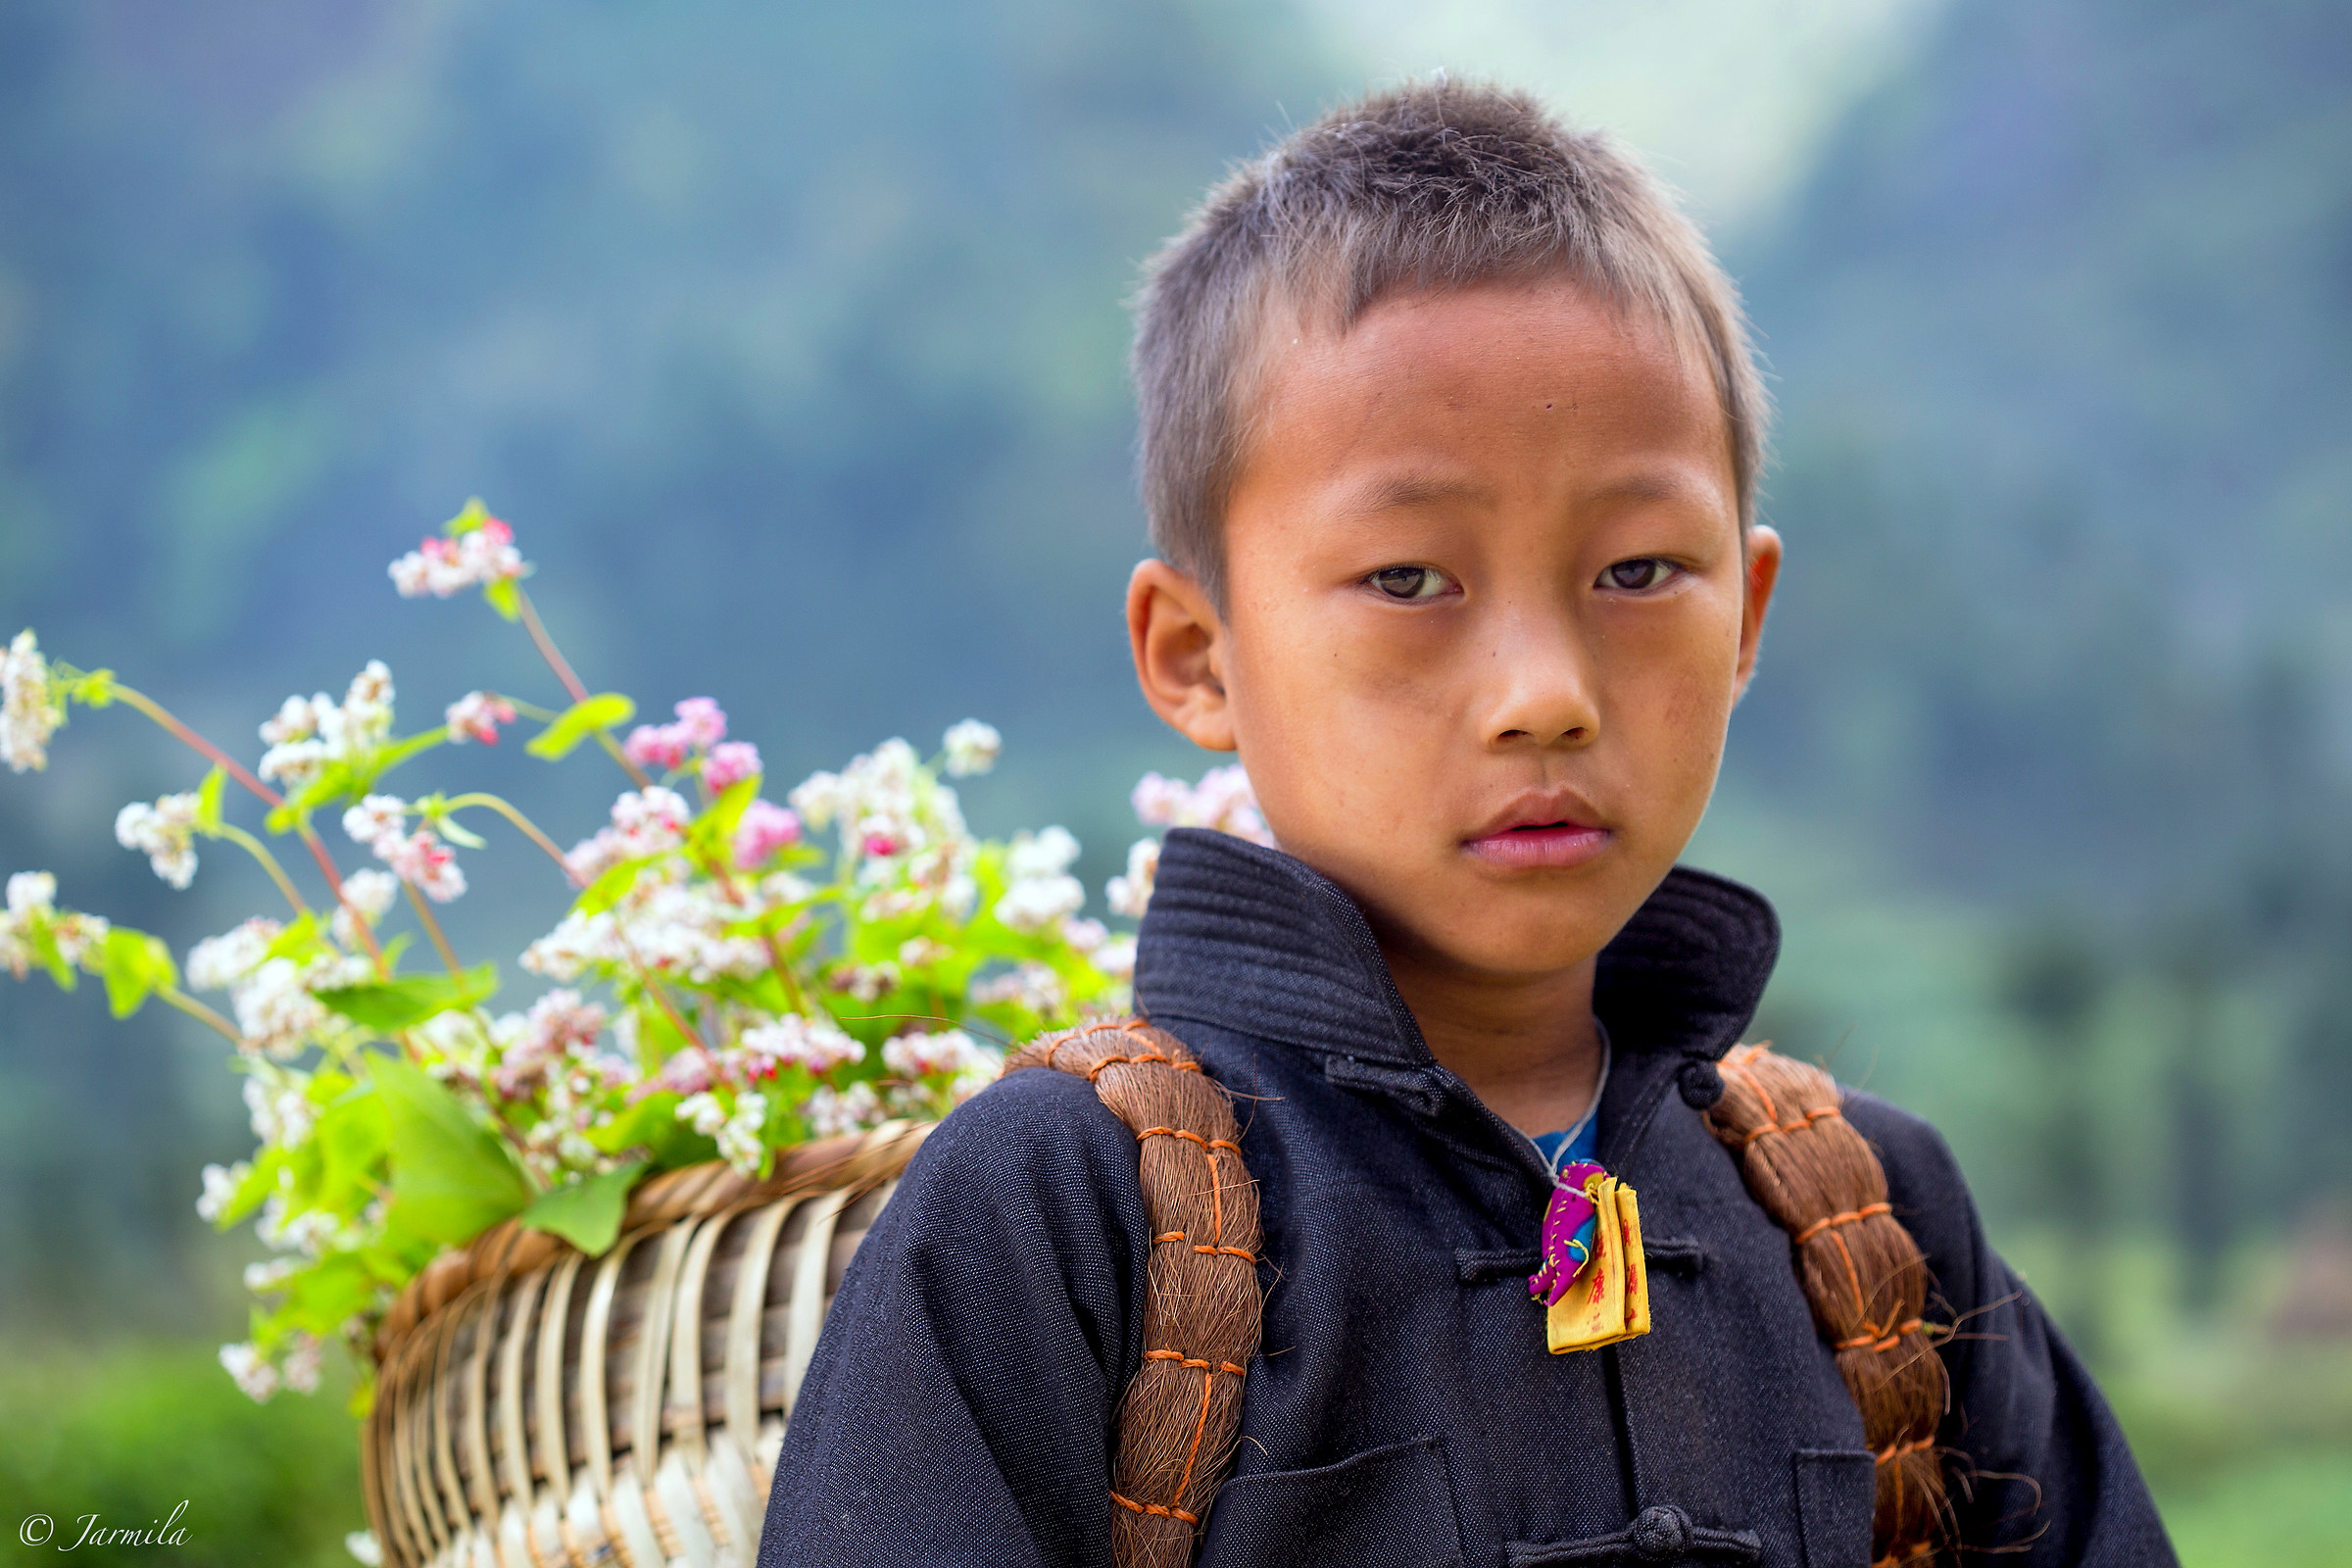 The Hmong boy with flower basket...